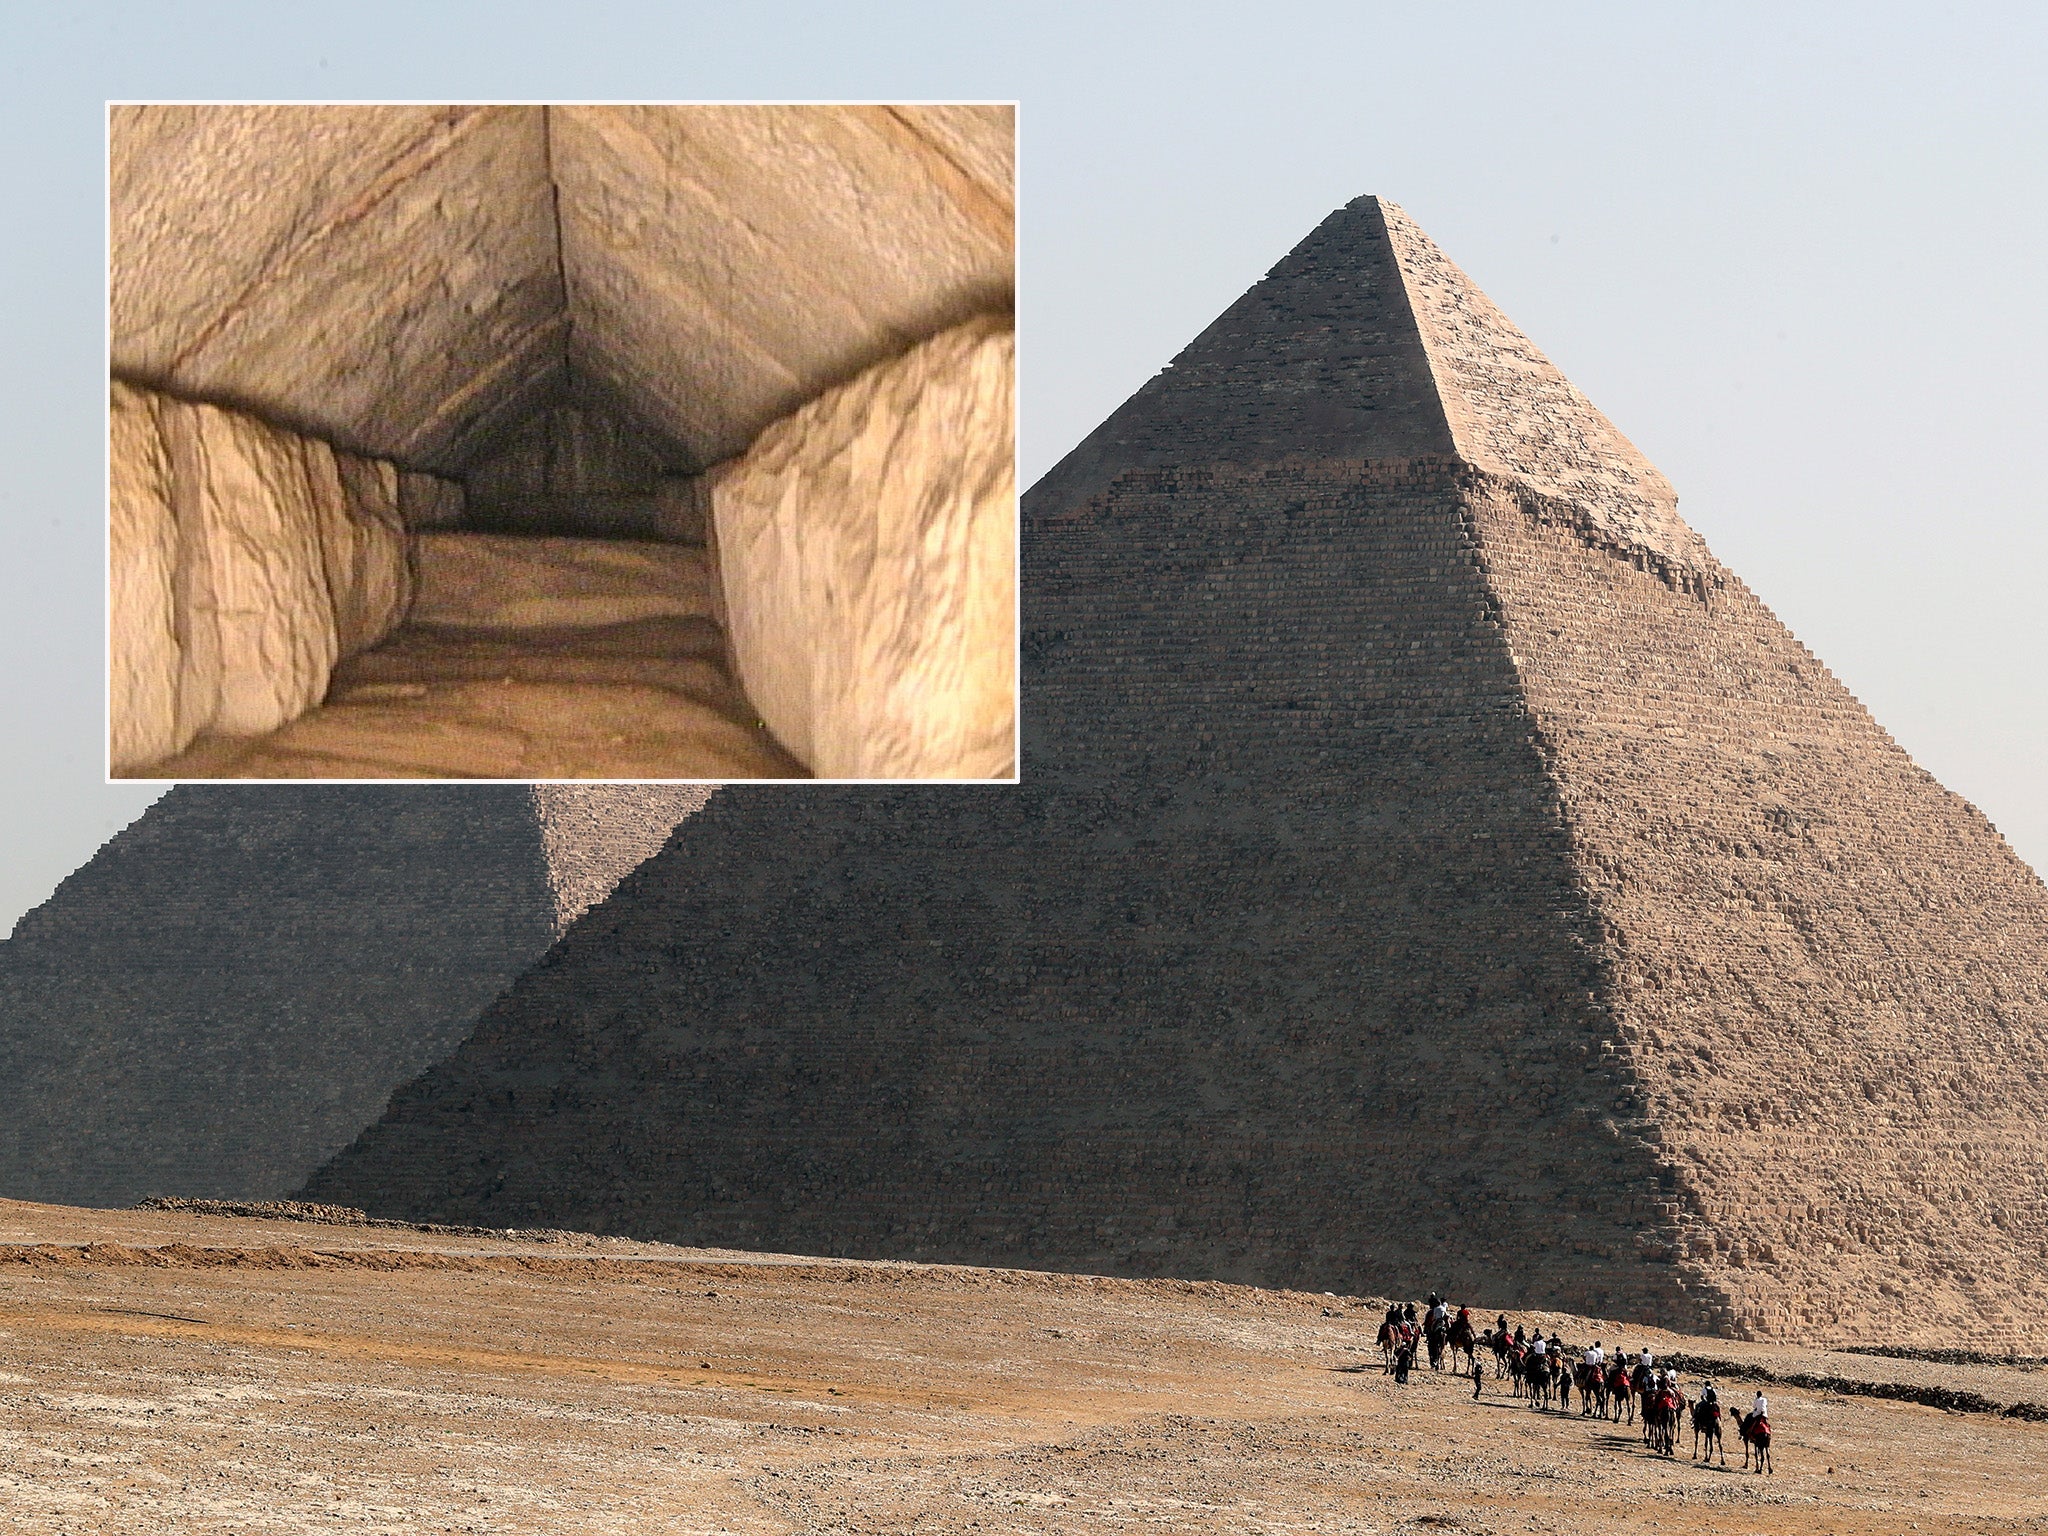 https://static.independent.co.uk/2023/03/02/15/Great%20Pyramid%20of%20Giza%20corridor.jpg